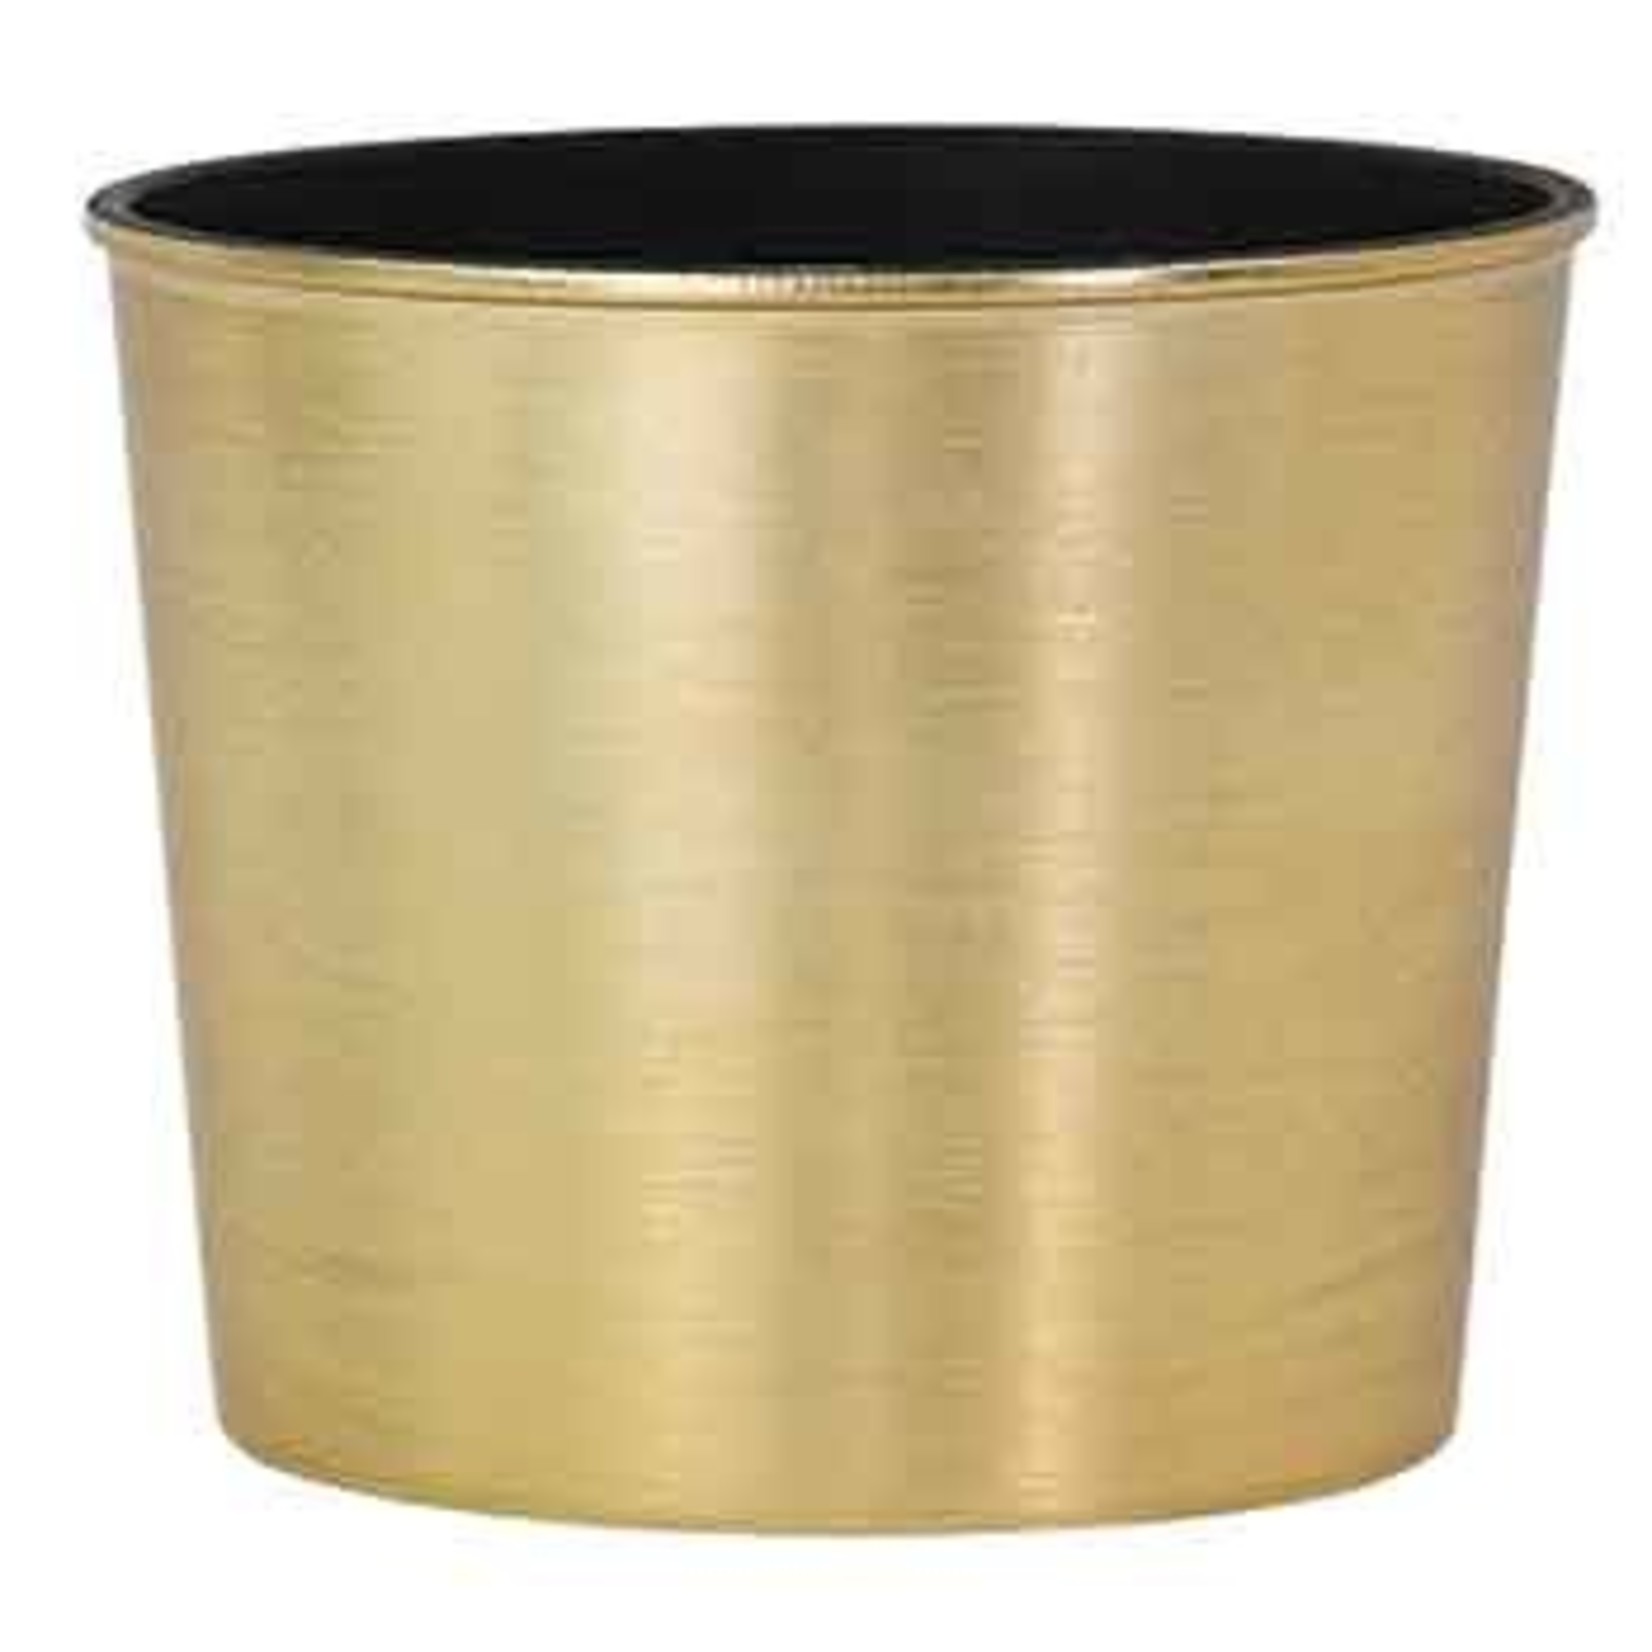 4.5”H X 4.75” GOLD PLASTIC TAPERED CYLINDER